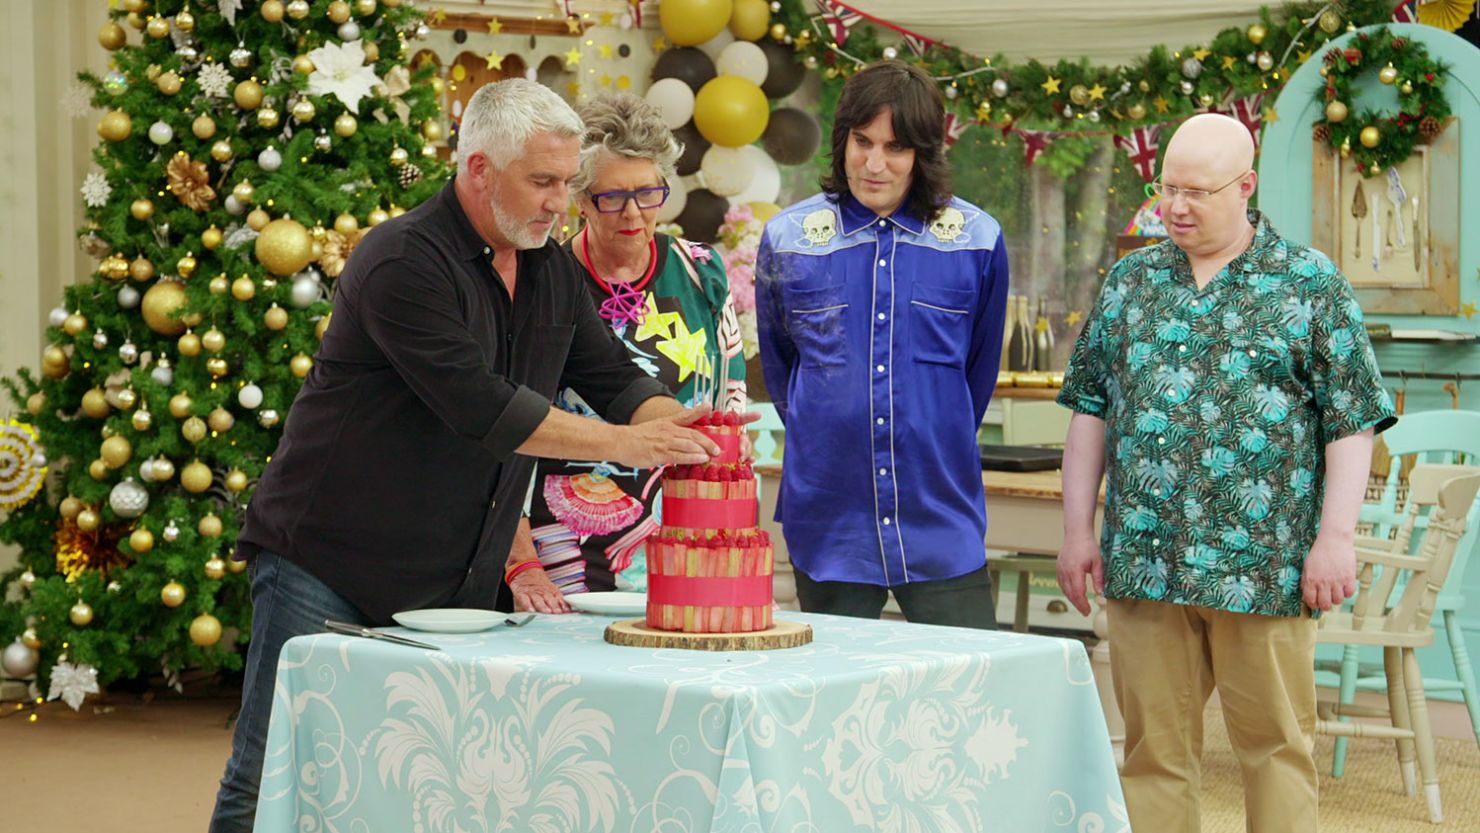 "The Great British Bake-Off: Holidays" may be just what you knead for holiday cheer.